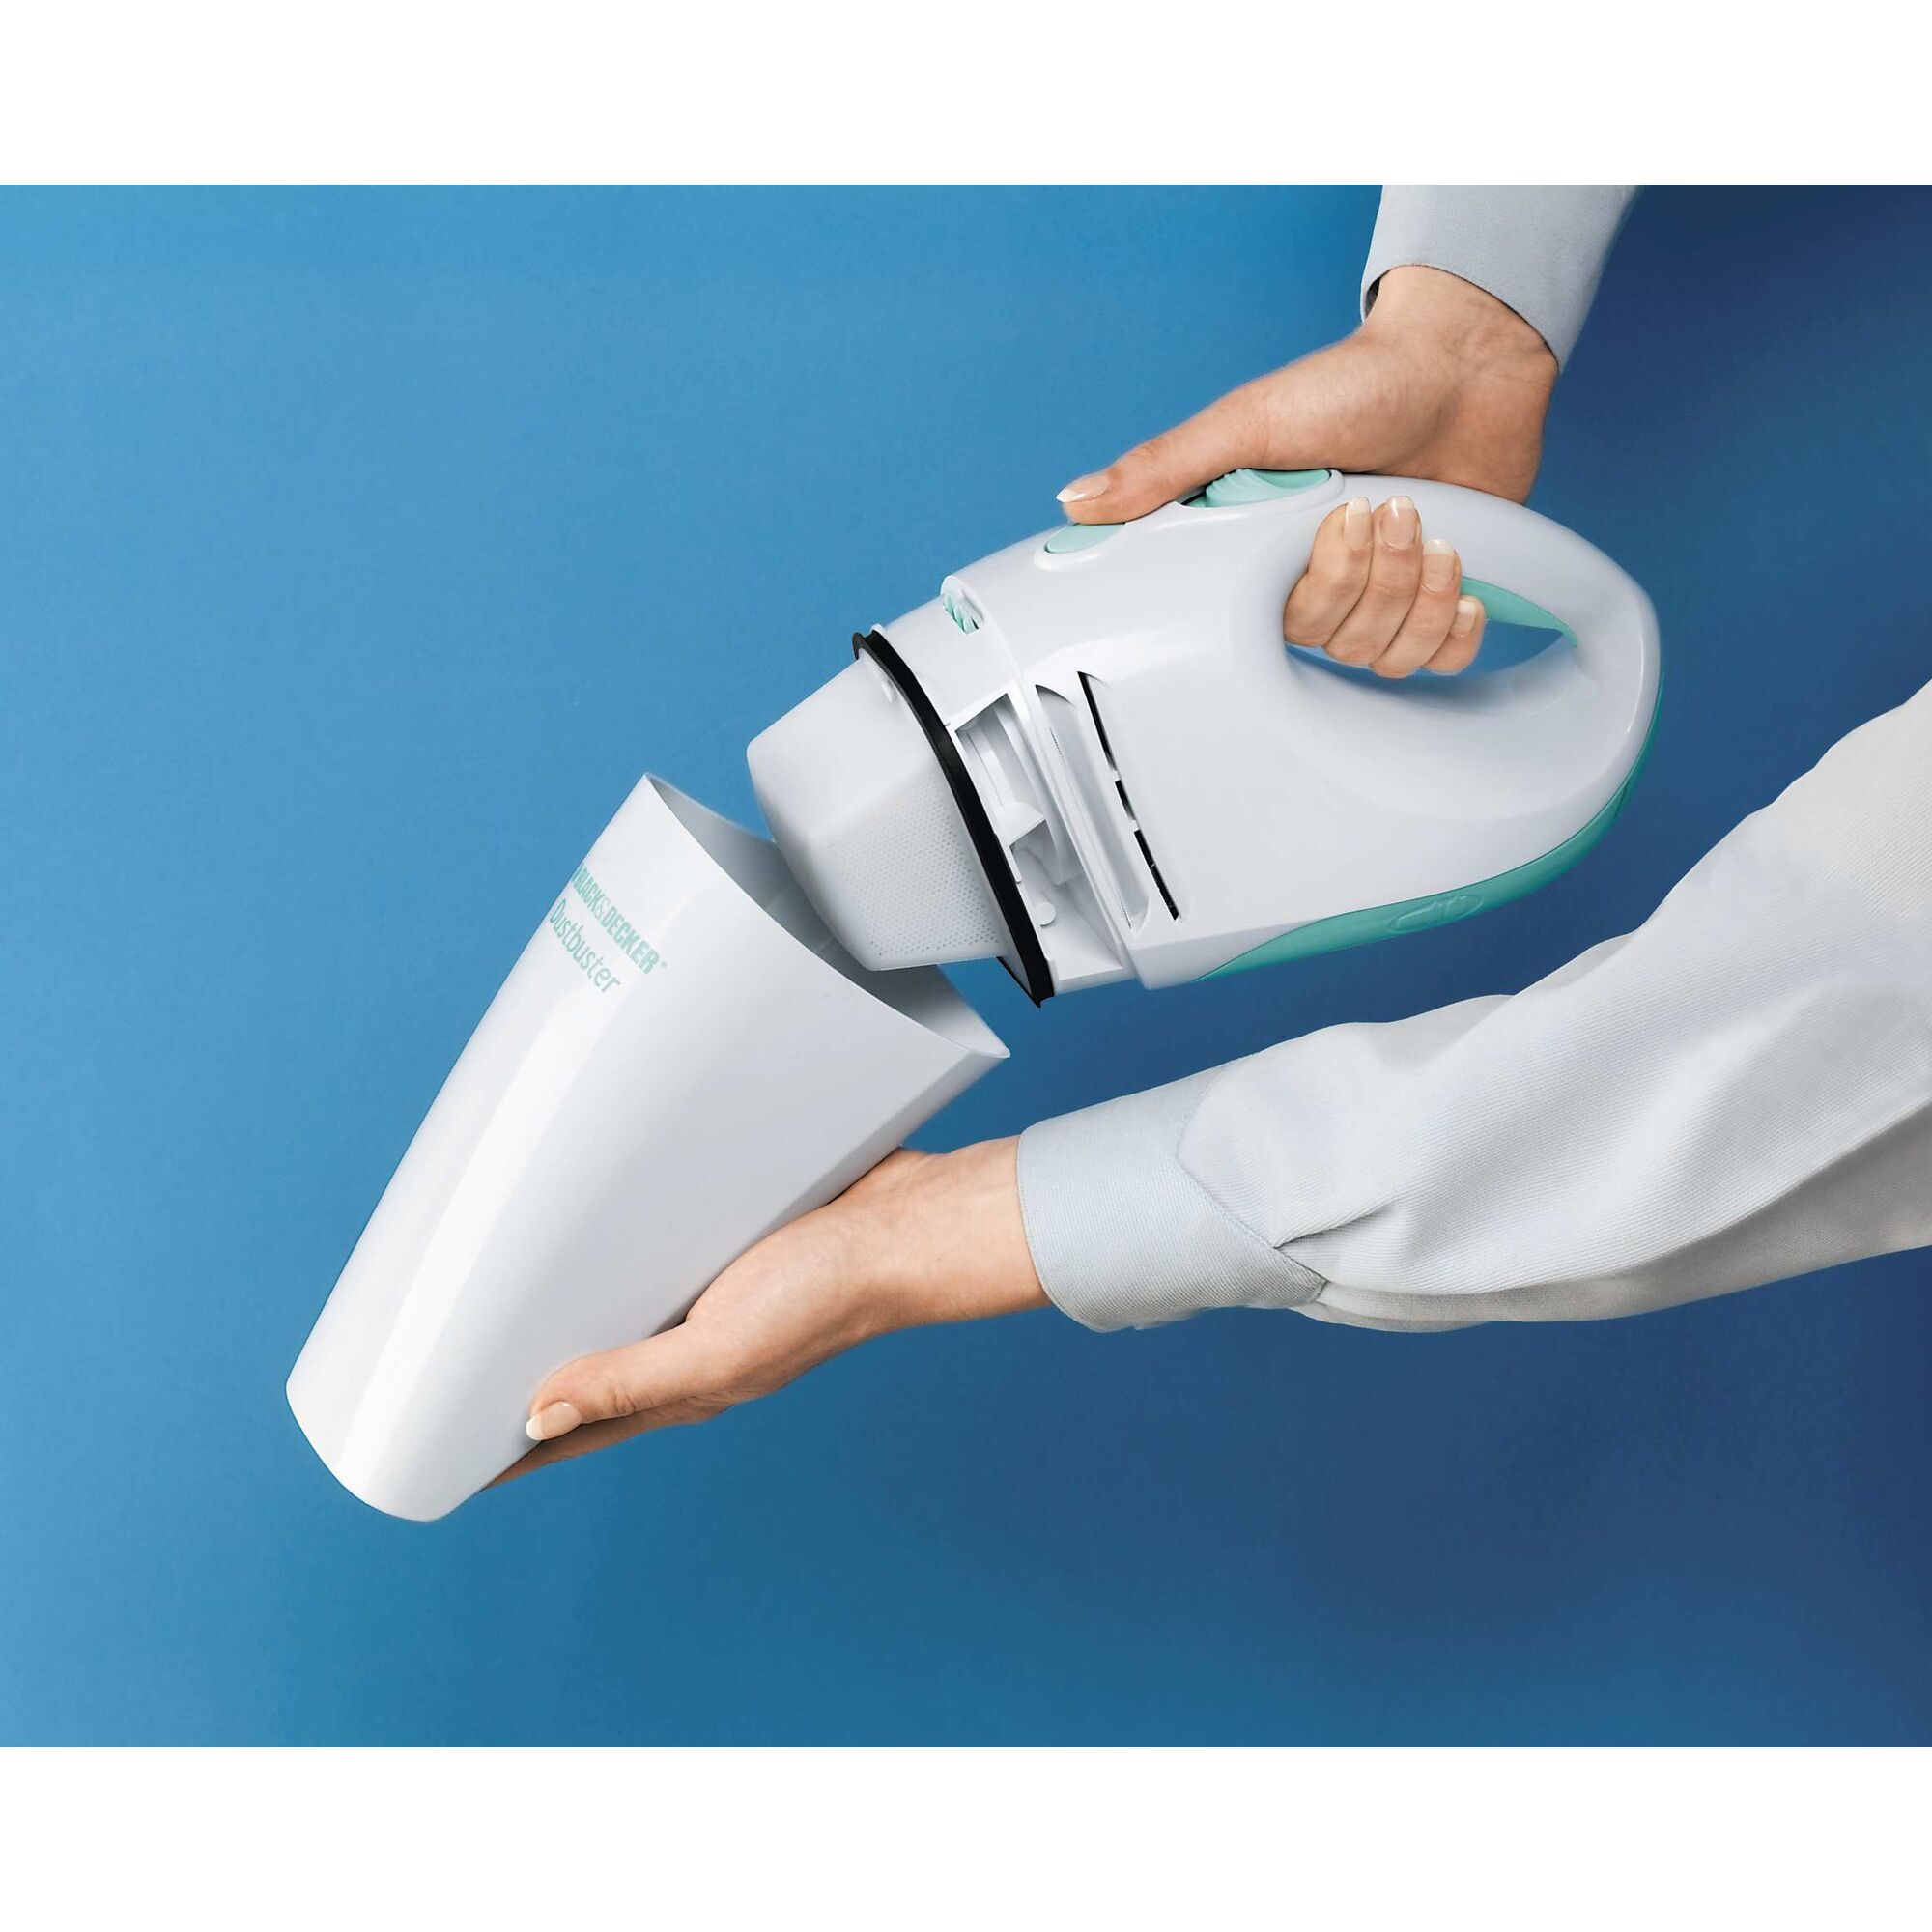 Replacement filter being used in dustbuster hand vacuum.